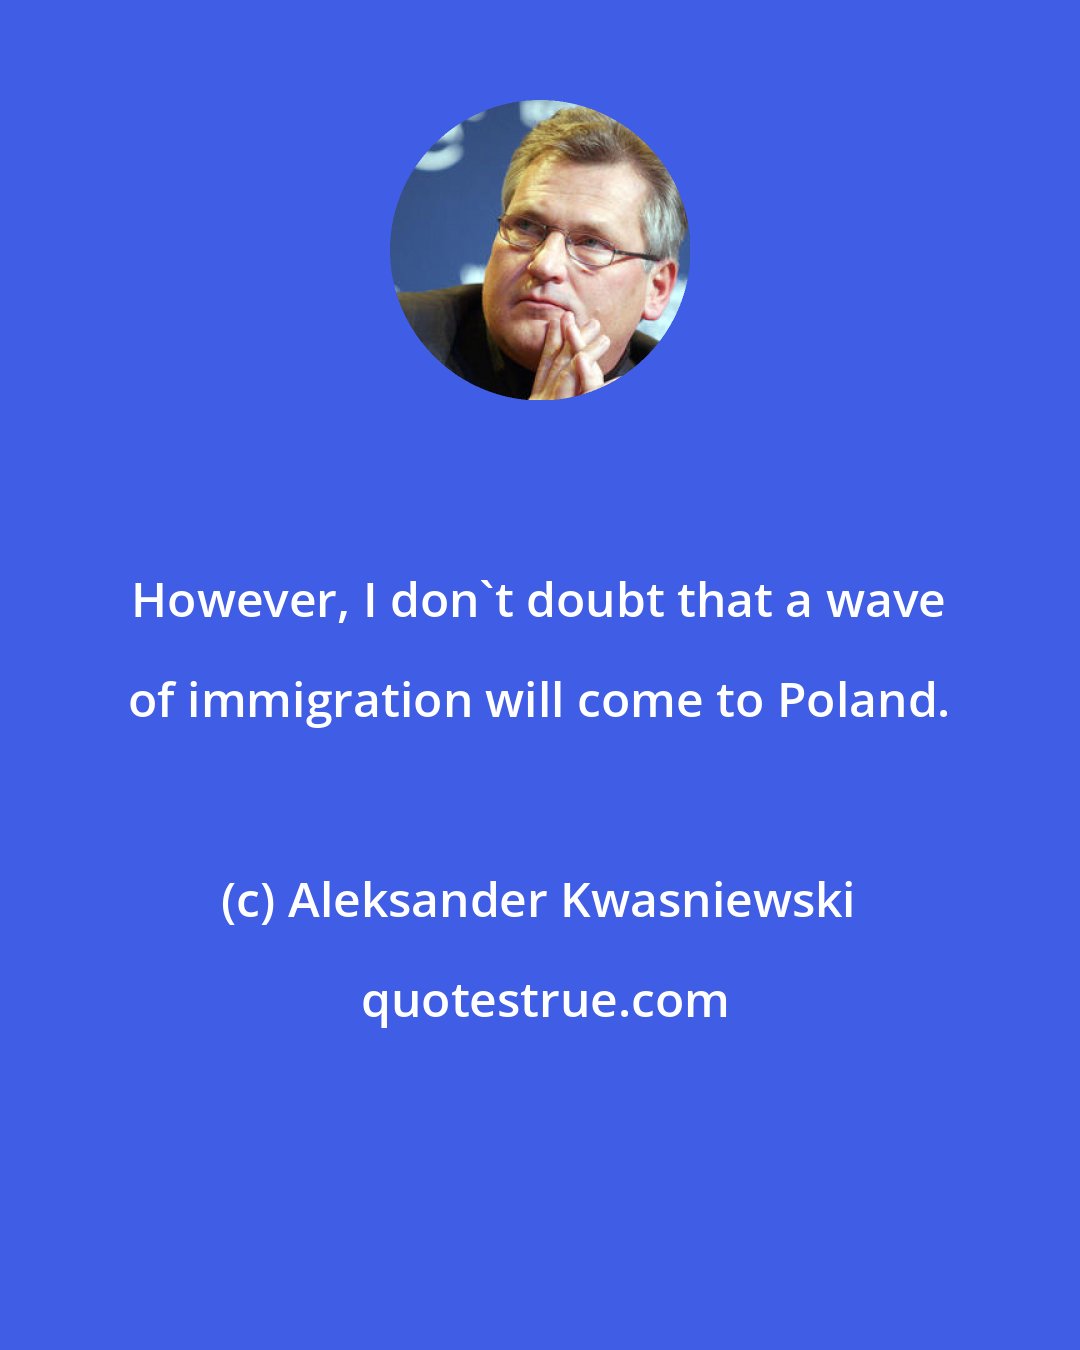 Aleksander Kwasniewski: However, I don't doubt that a wave of immigration will come to Poland.